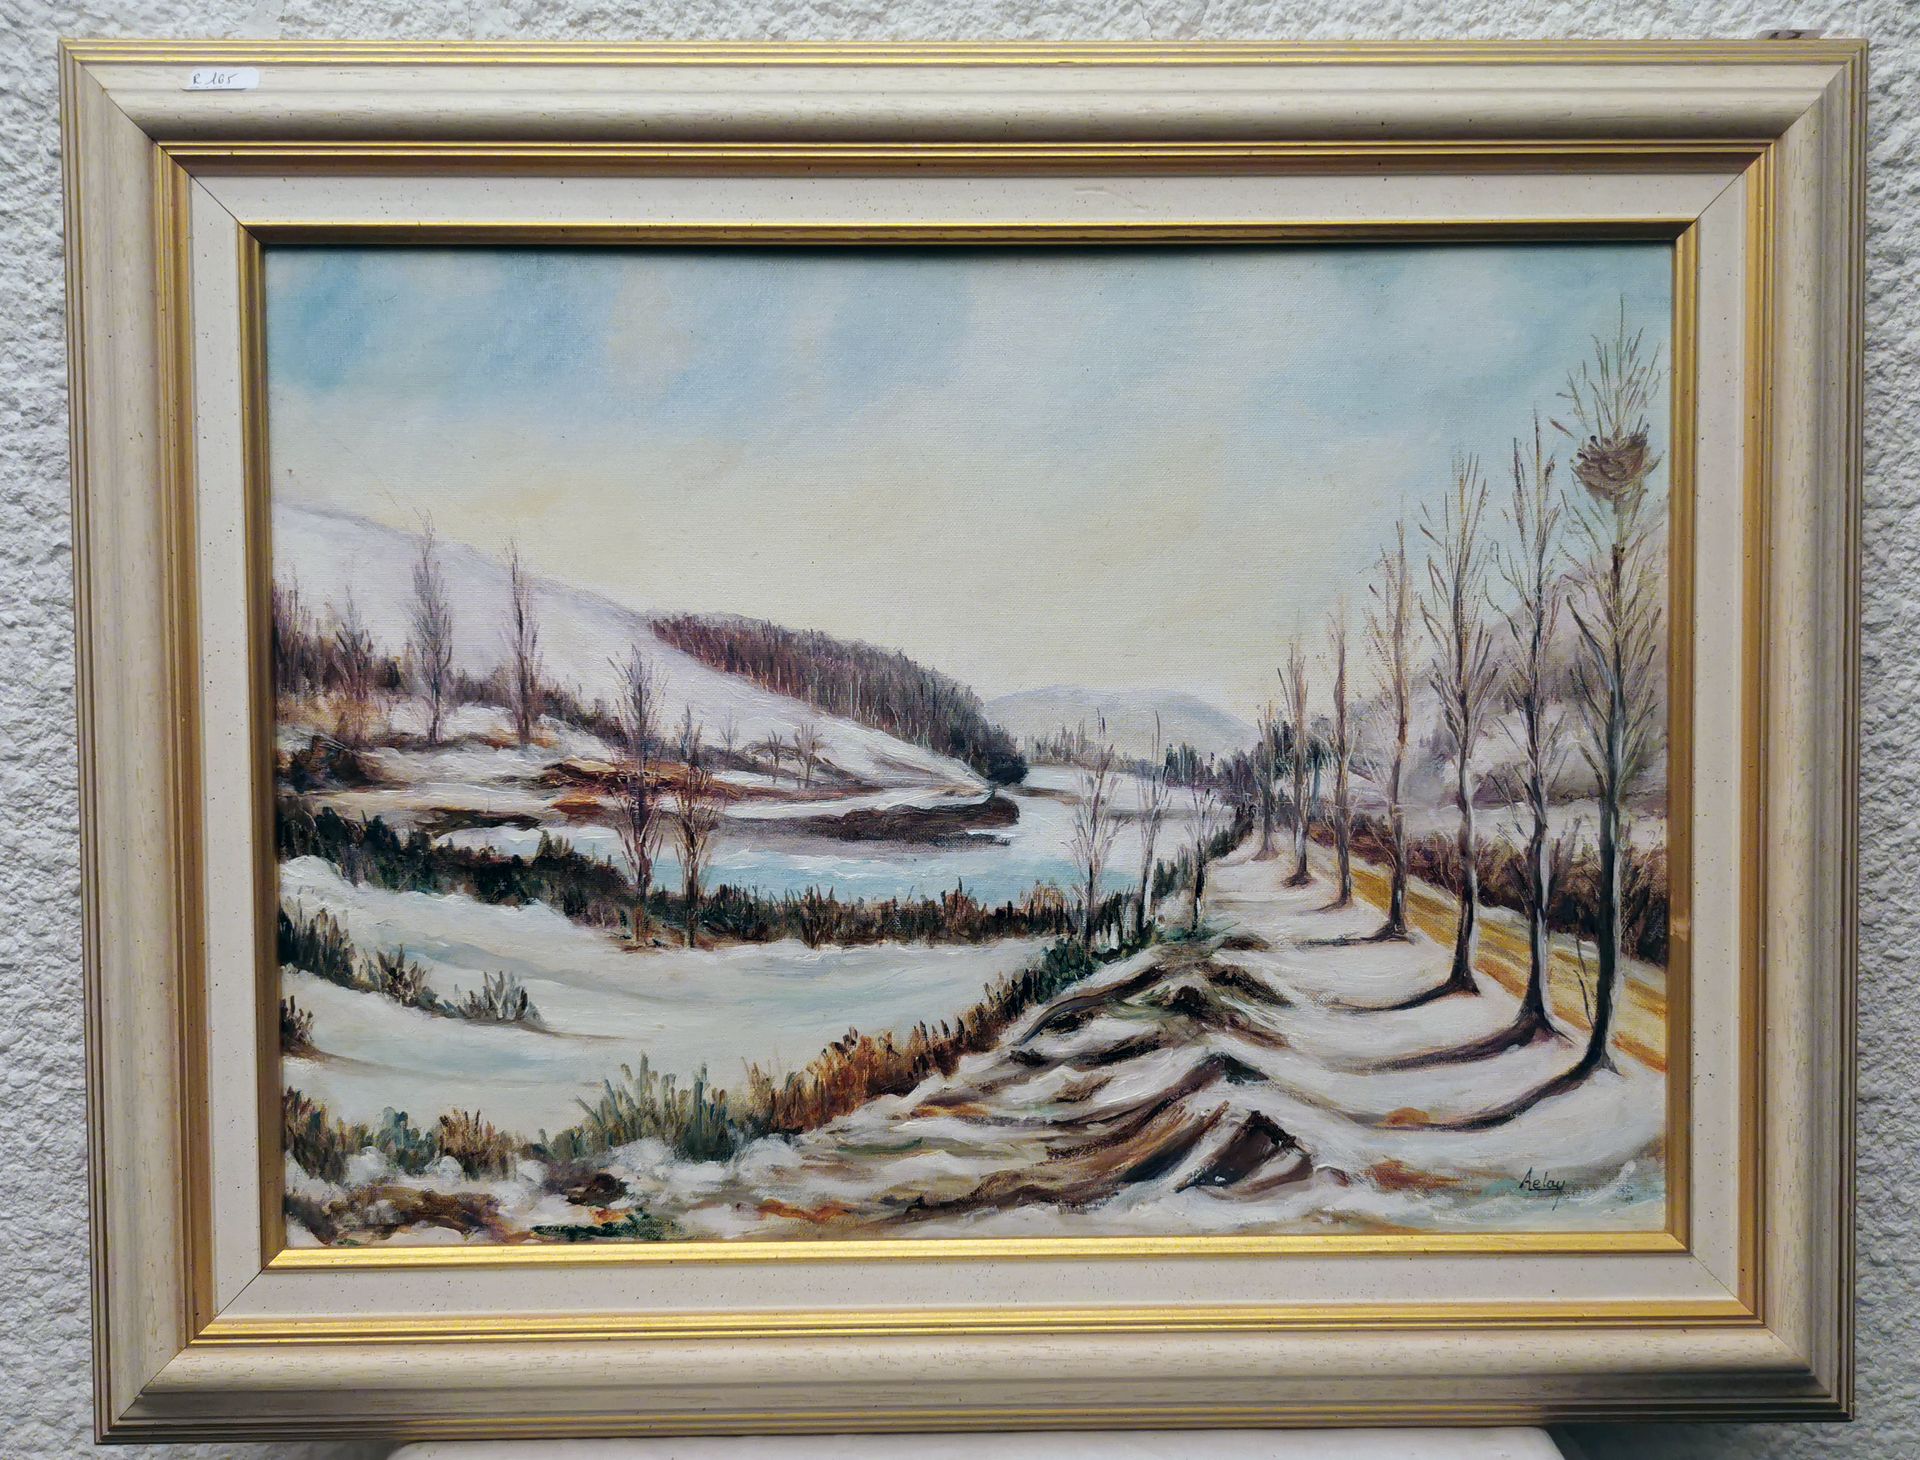 Aelay AELAY SBD "WINTER LANDSCAPE" HST WITHOUT FRAME 46X33 FRAME 59X46